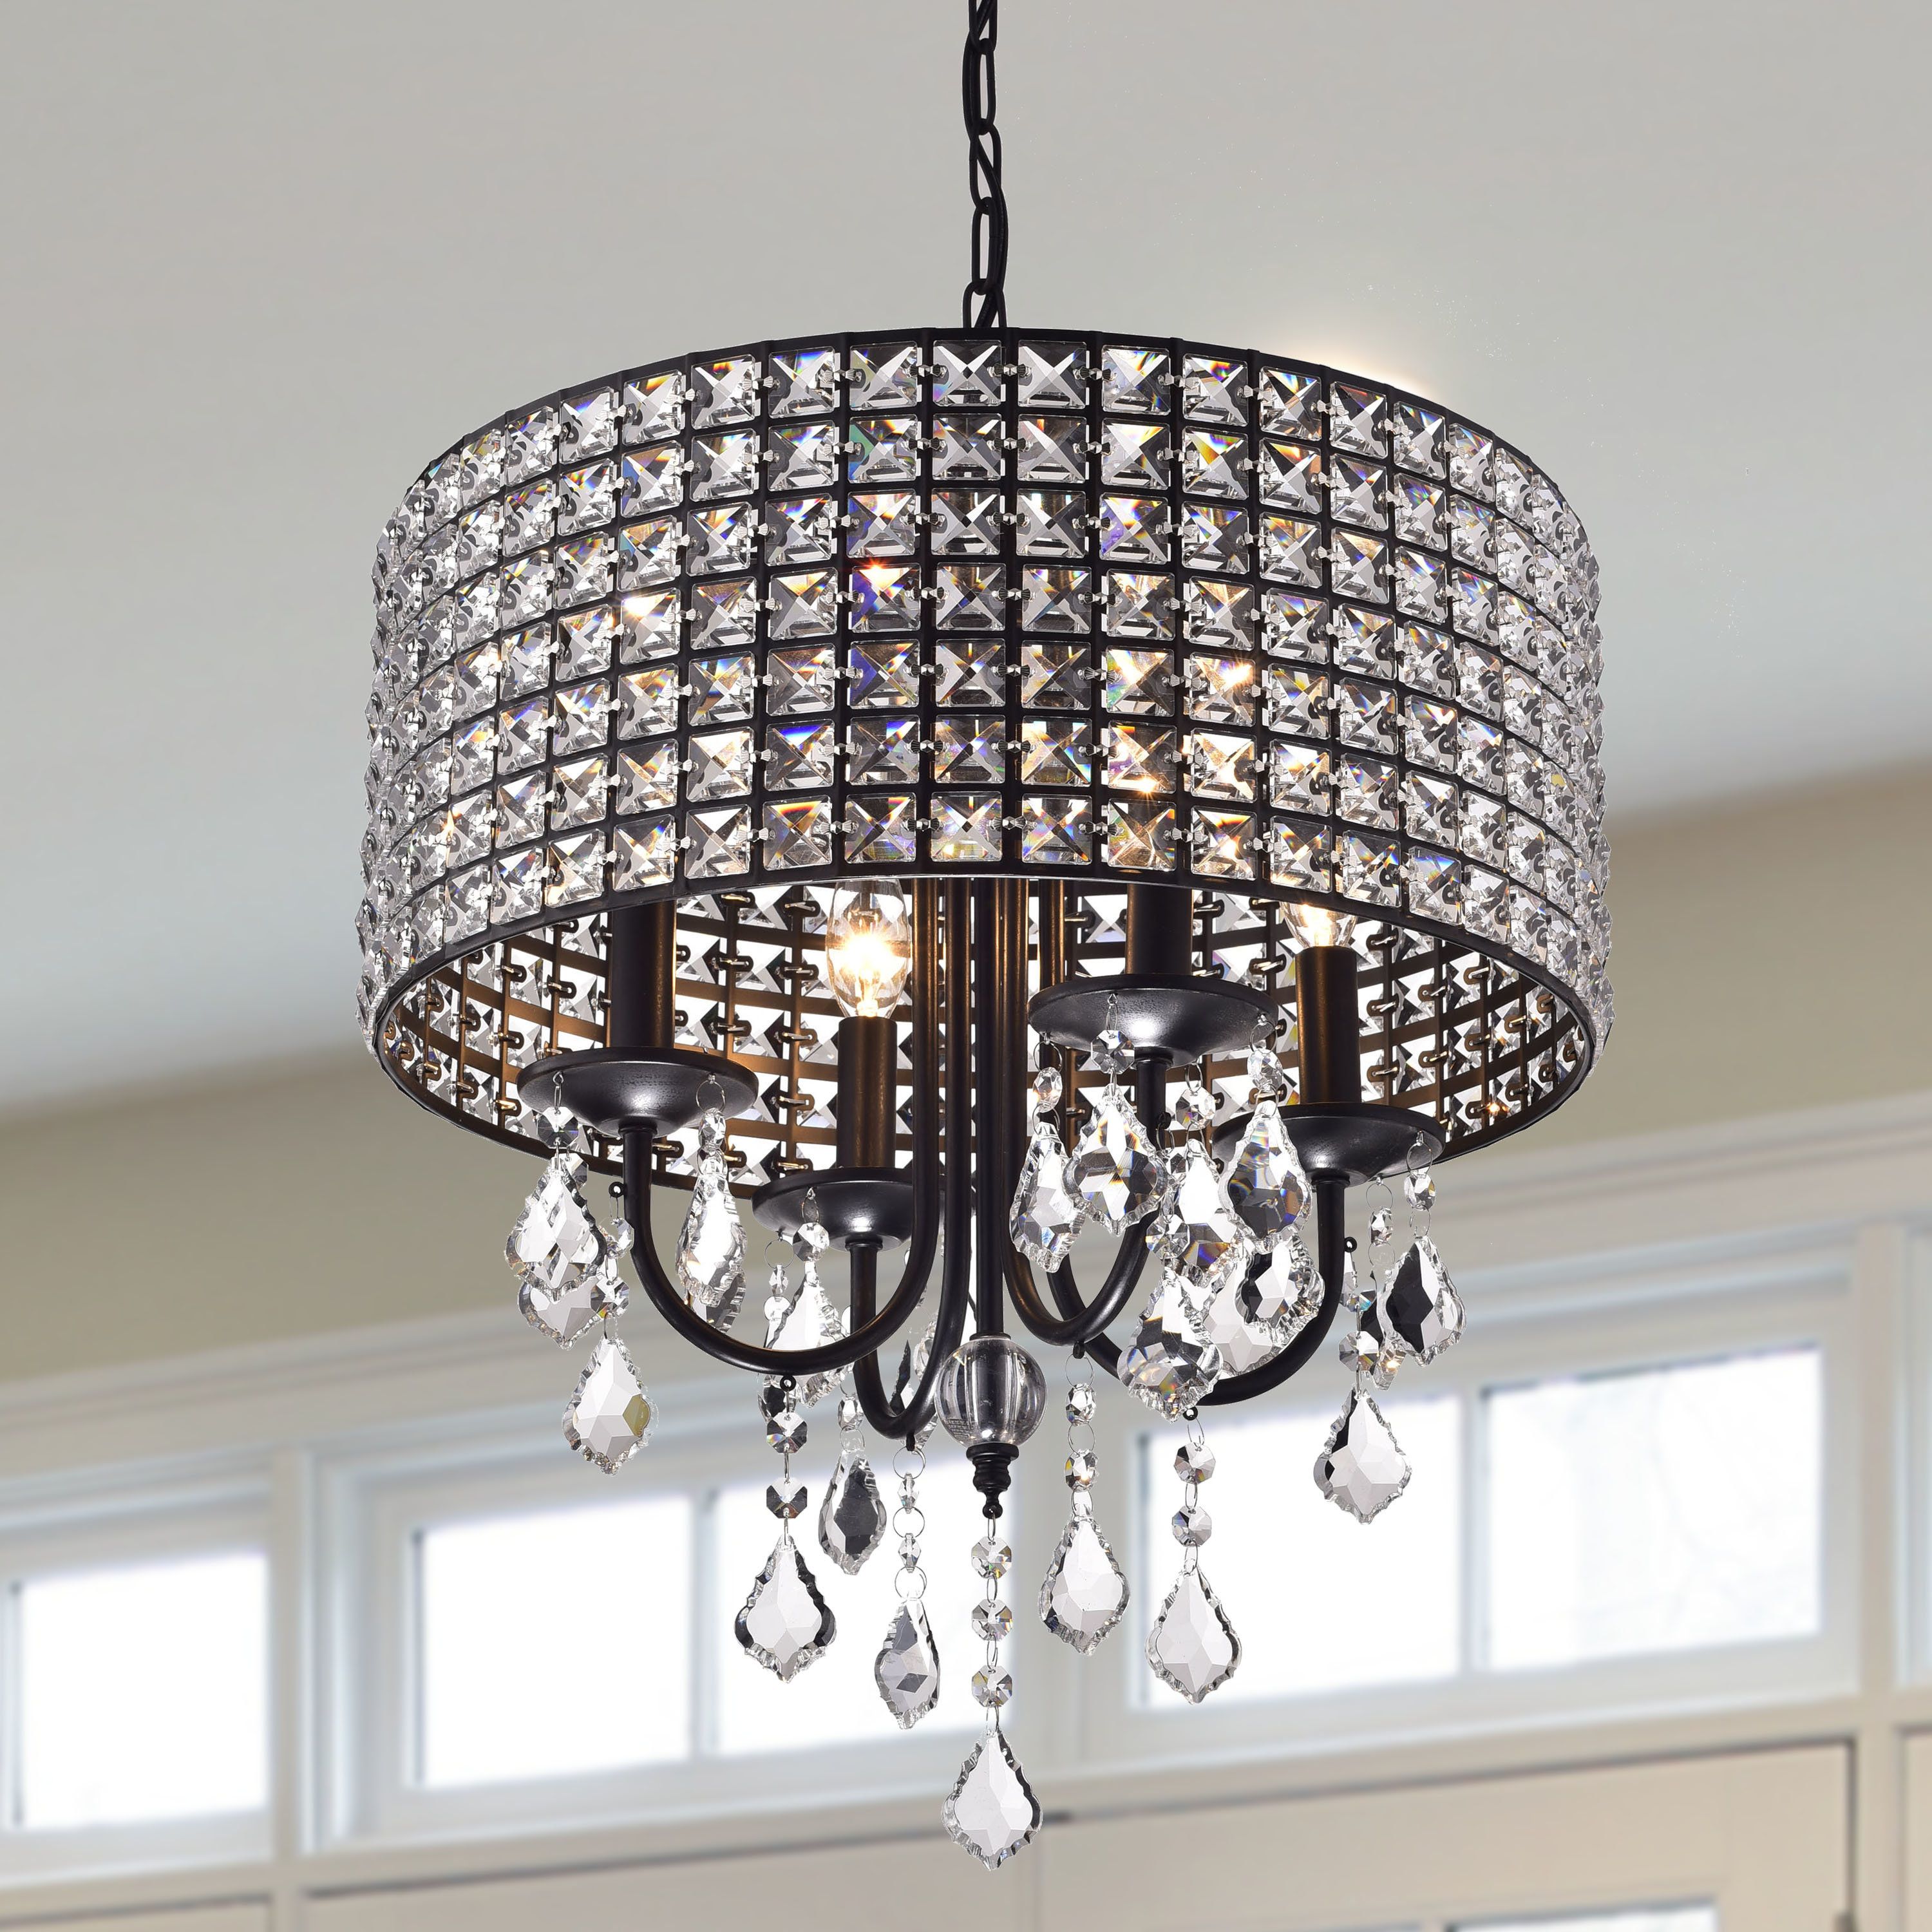 Albano 4 Light Crystal Chandelier For Von 4 Light Crystal Chandeliers (View 5 of 30)